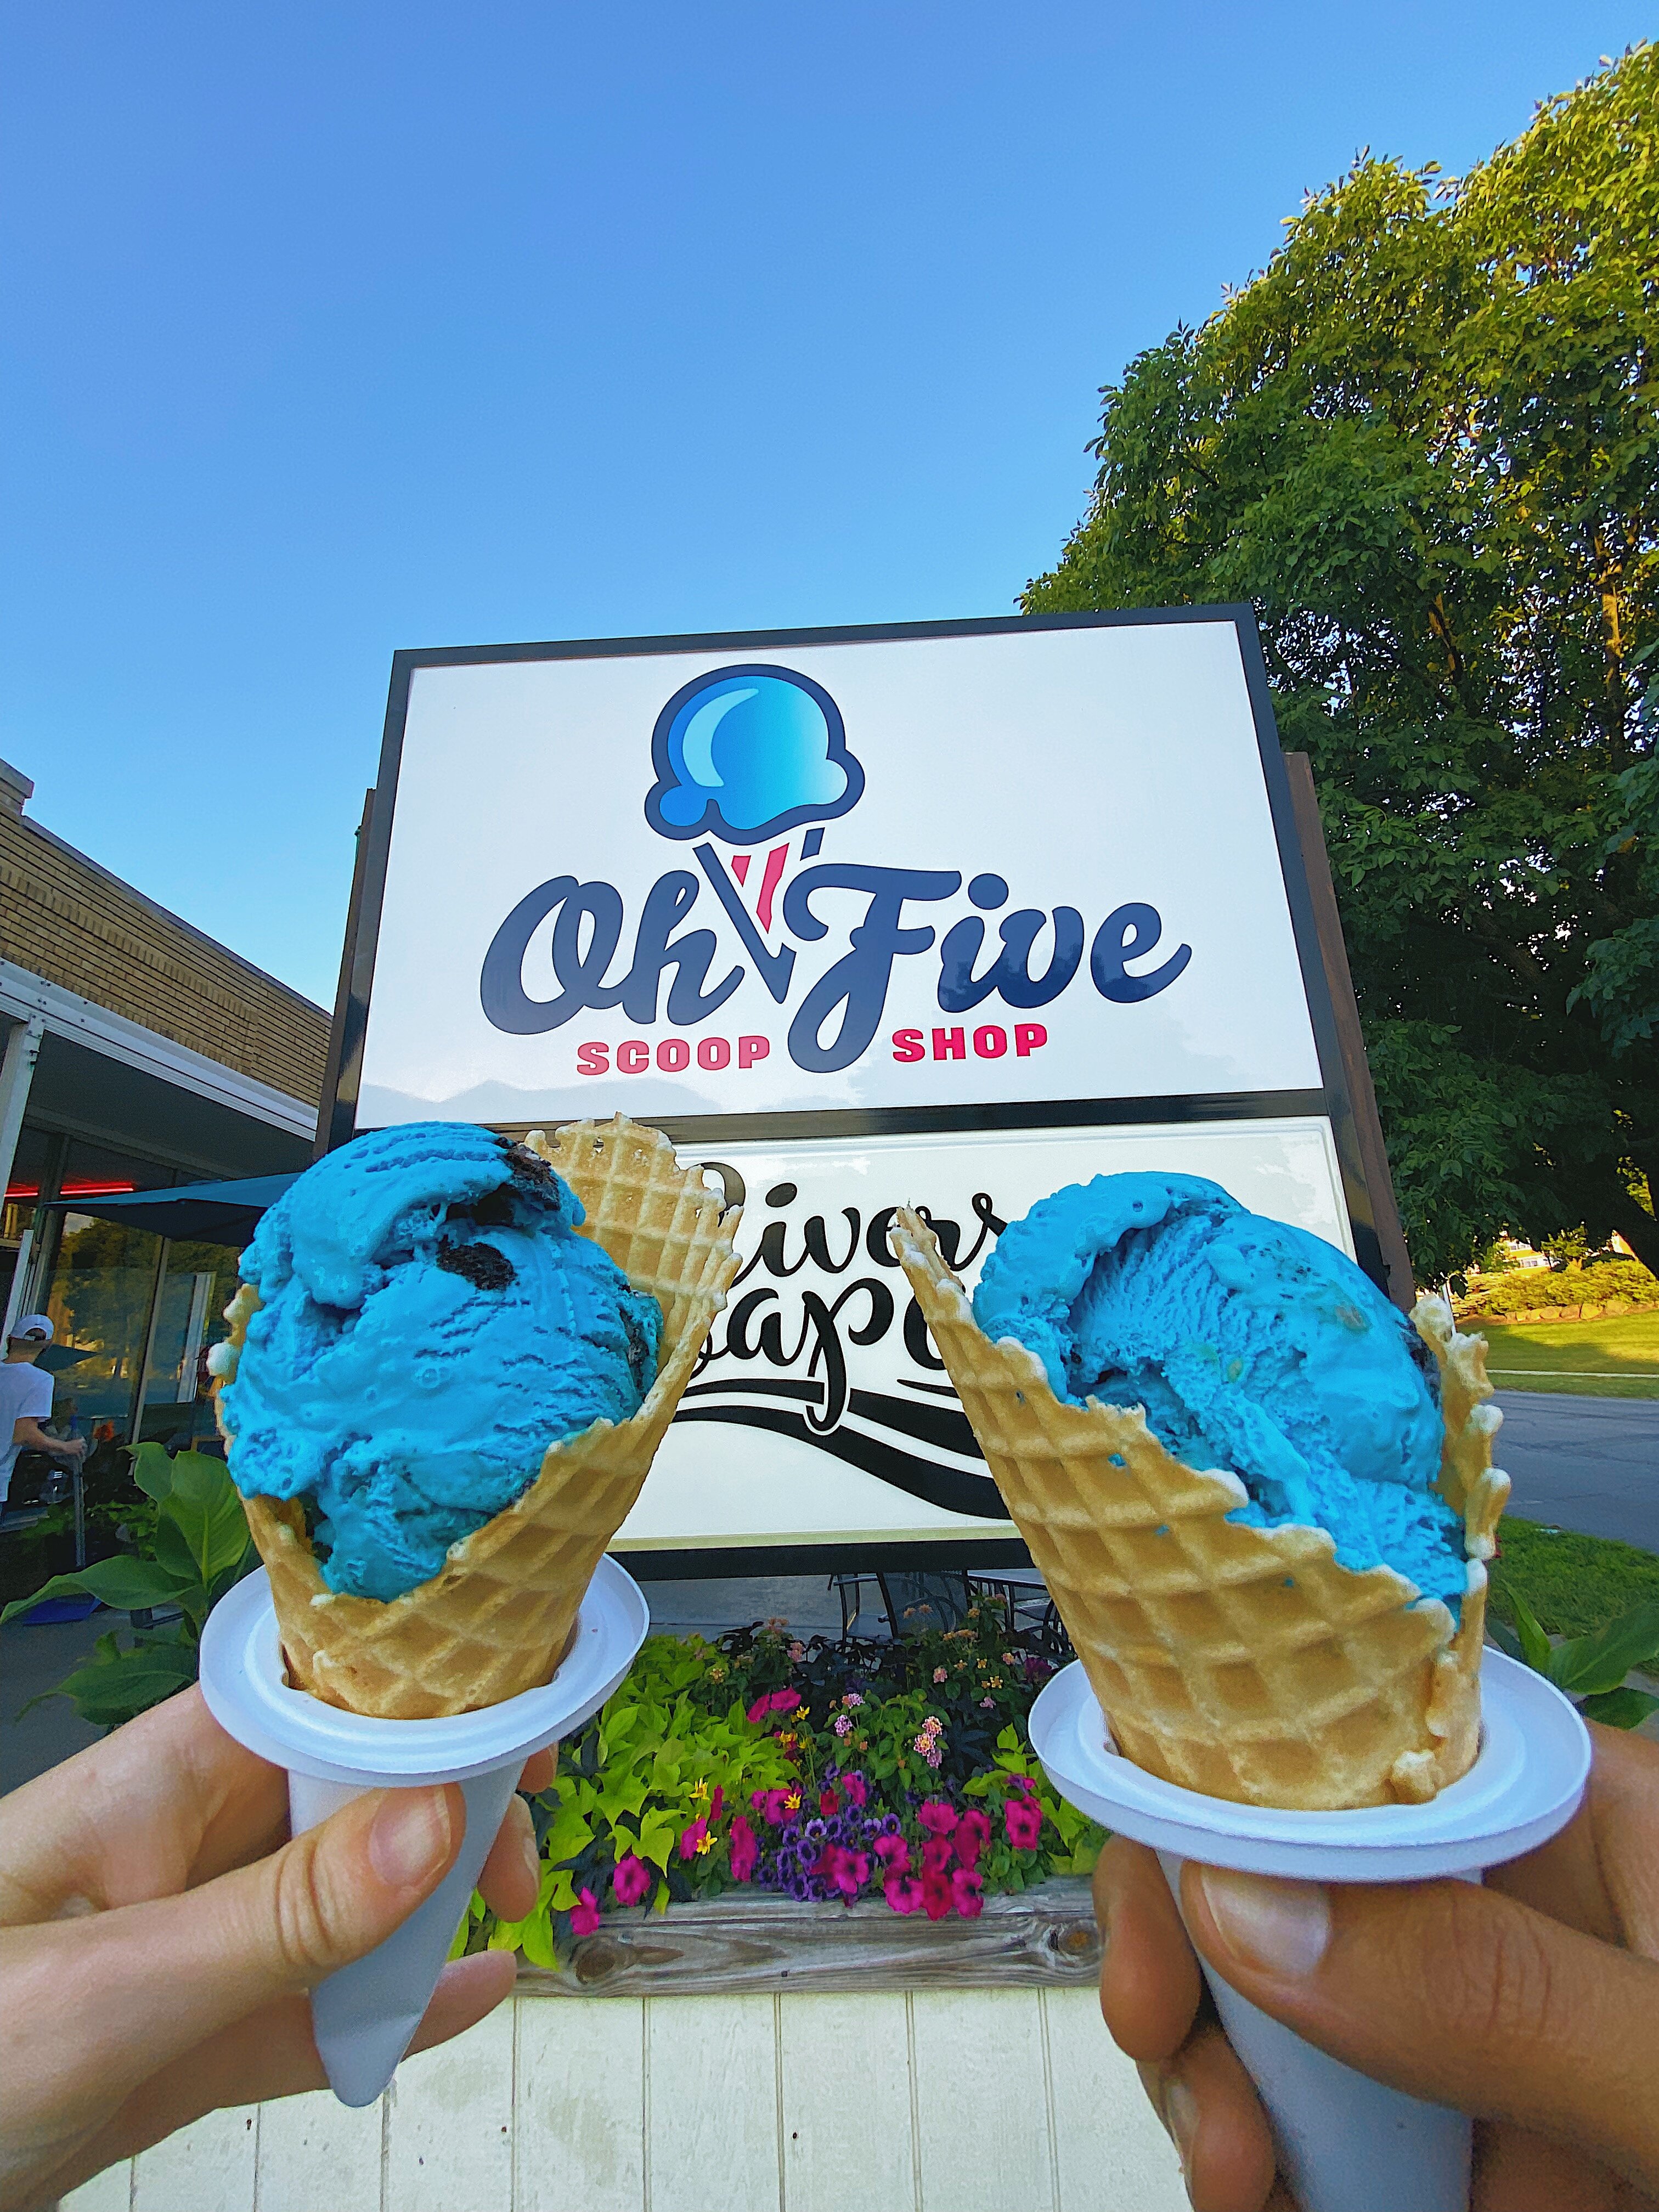 The Oh Five Scoop Shop is located at 1937 E. State Blvd.